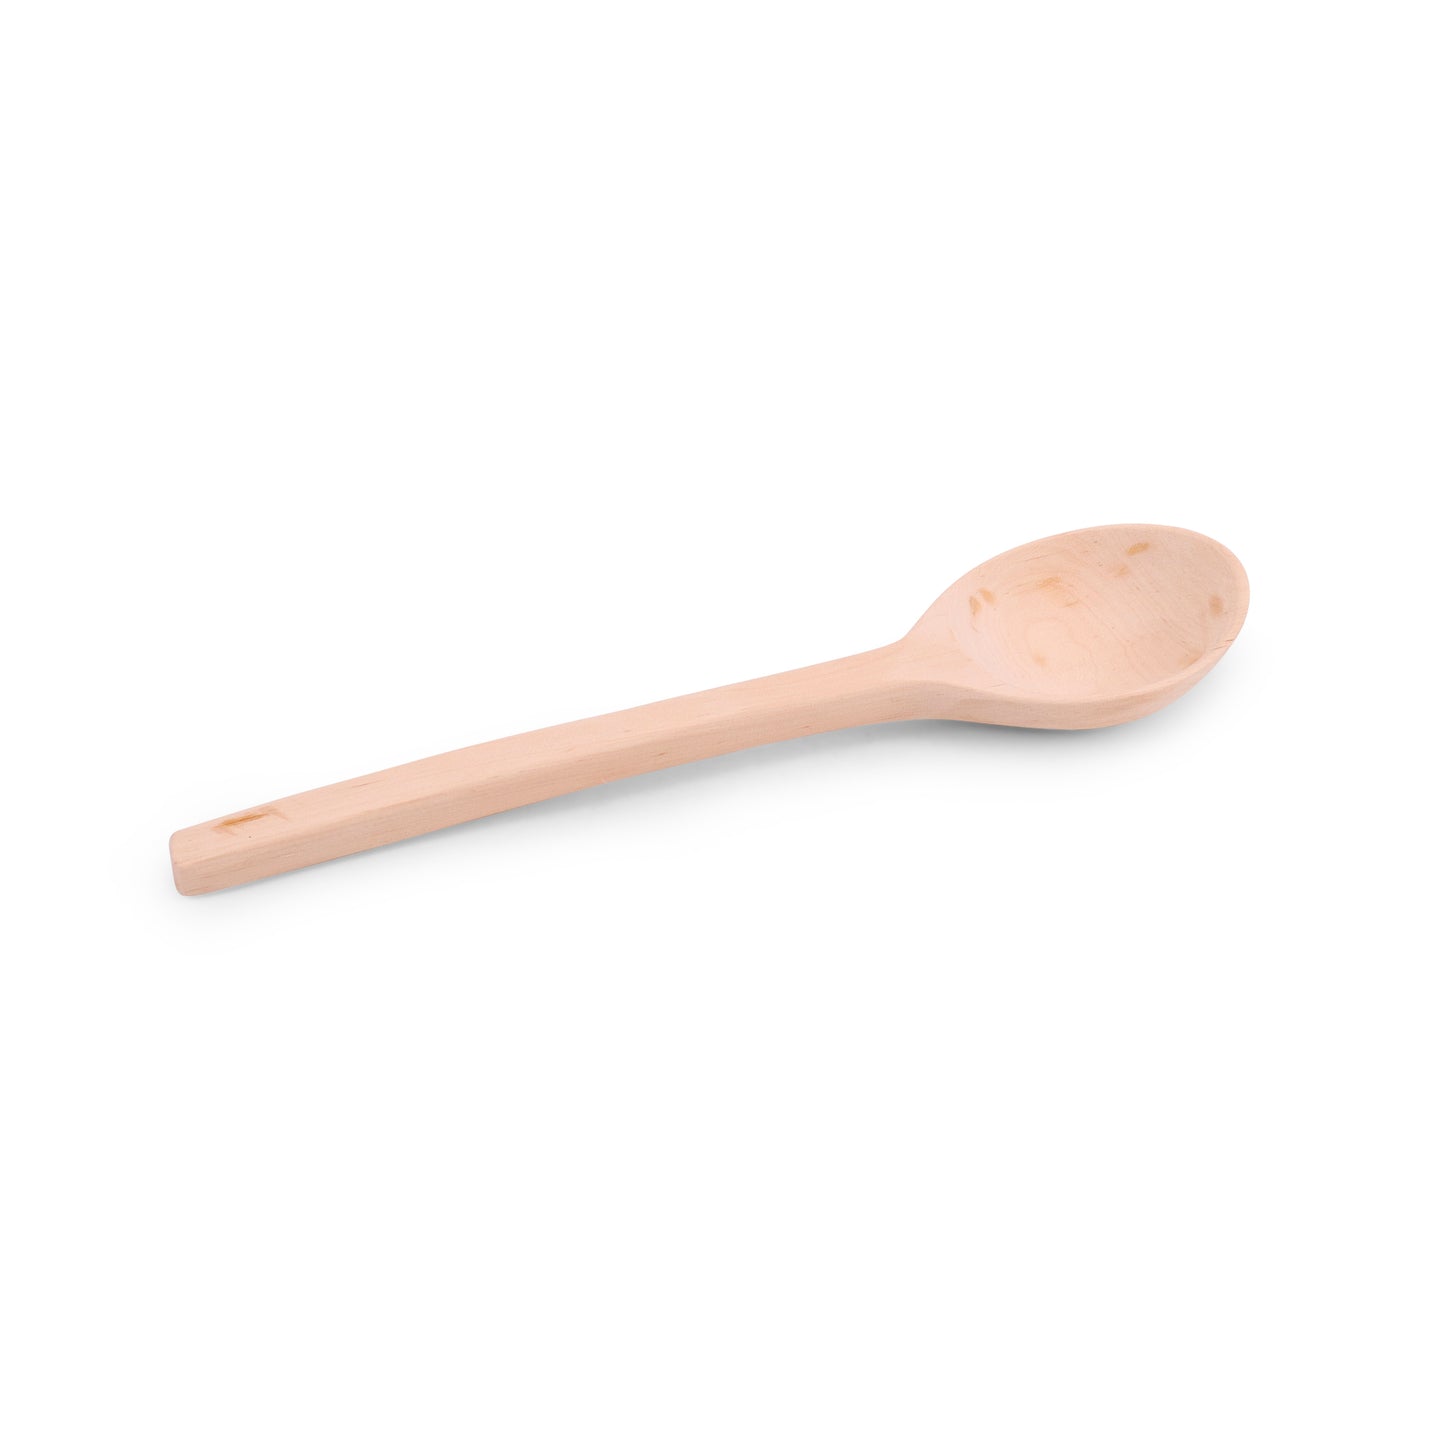 Hand-Carved Wooden Spoon. Pattern: Large